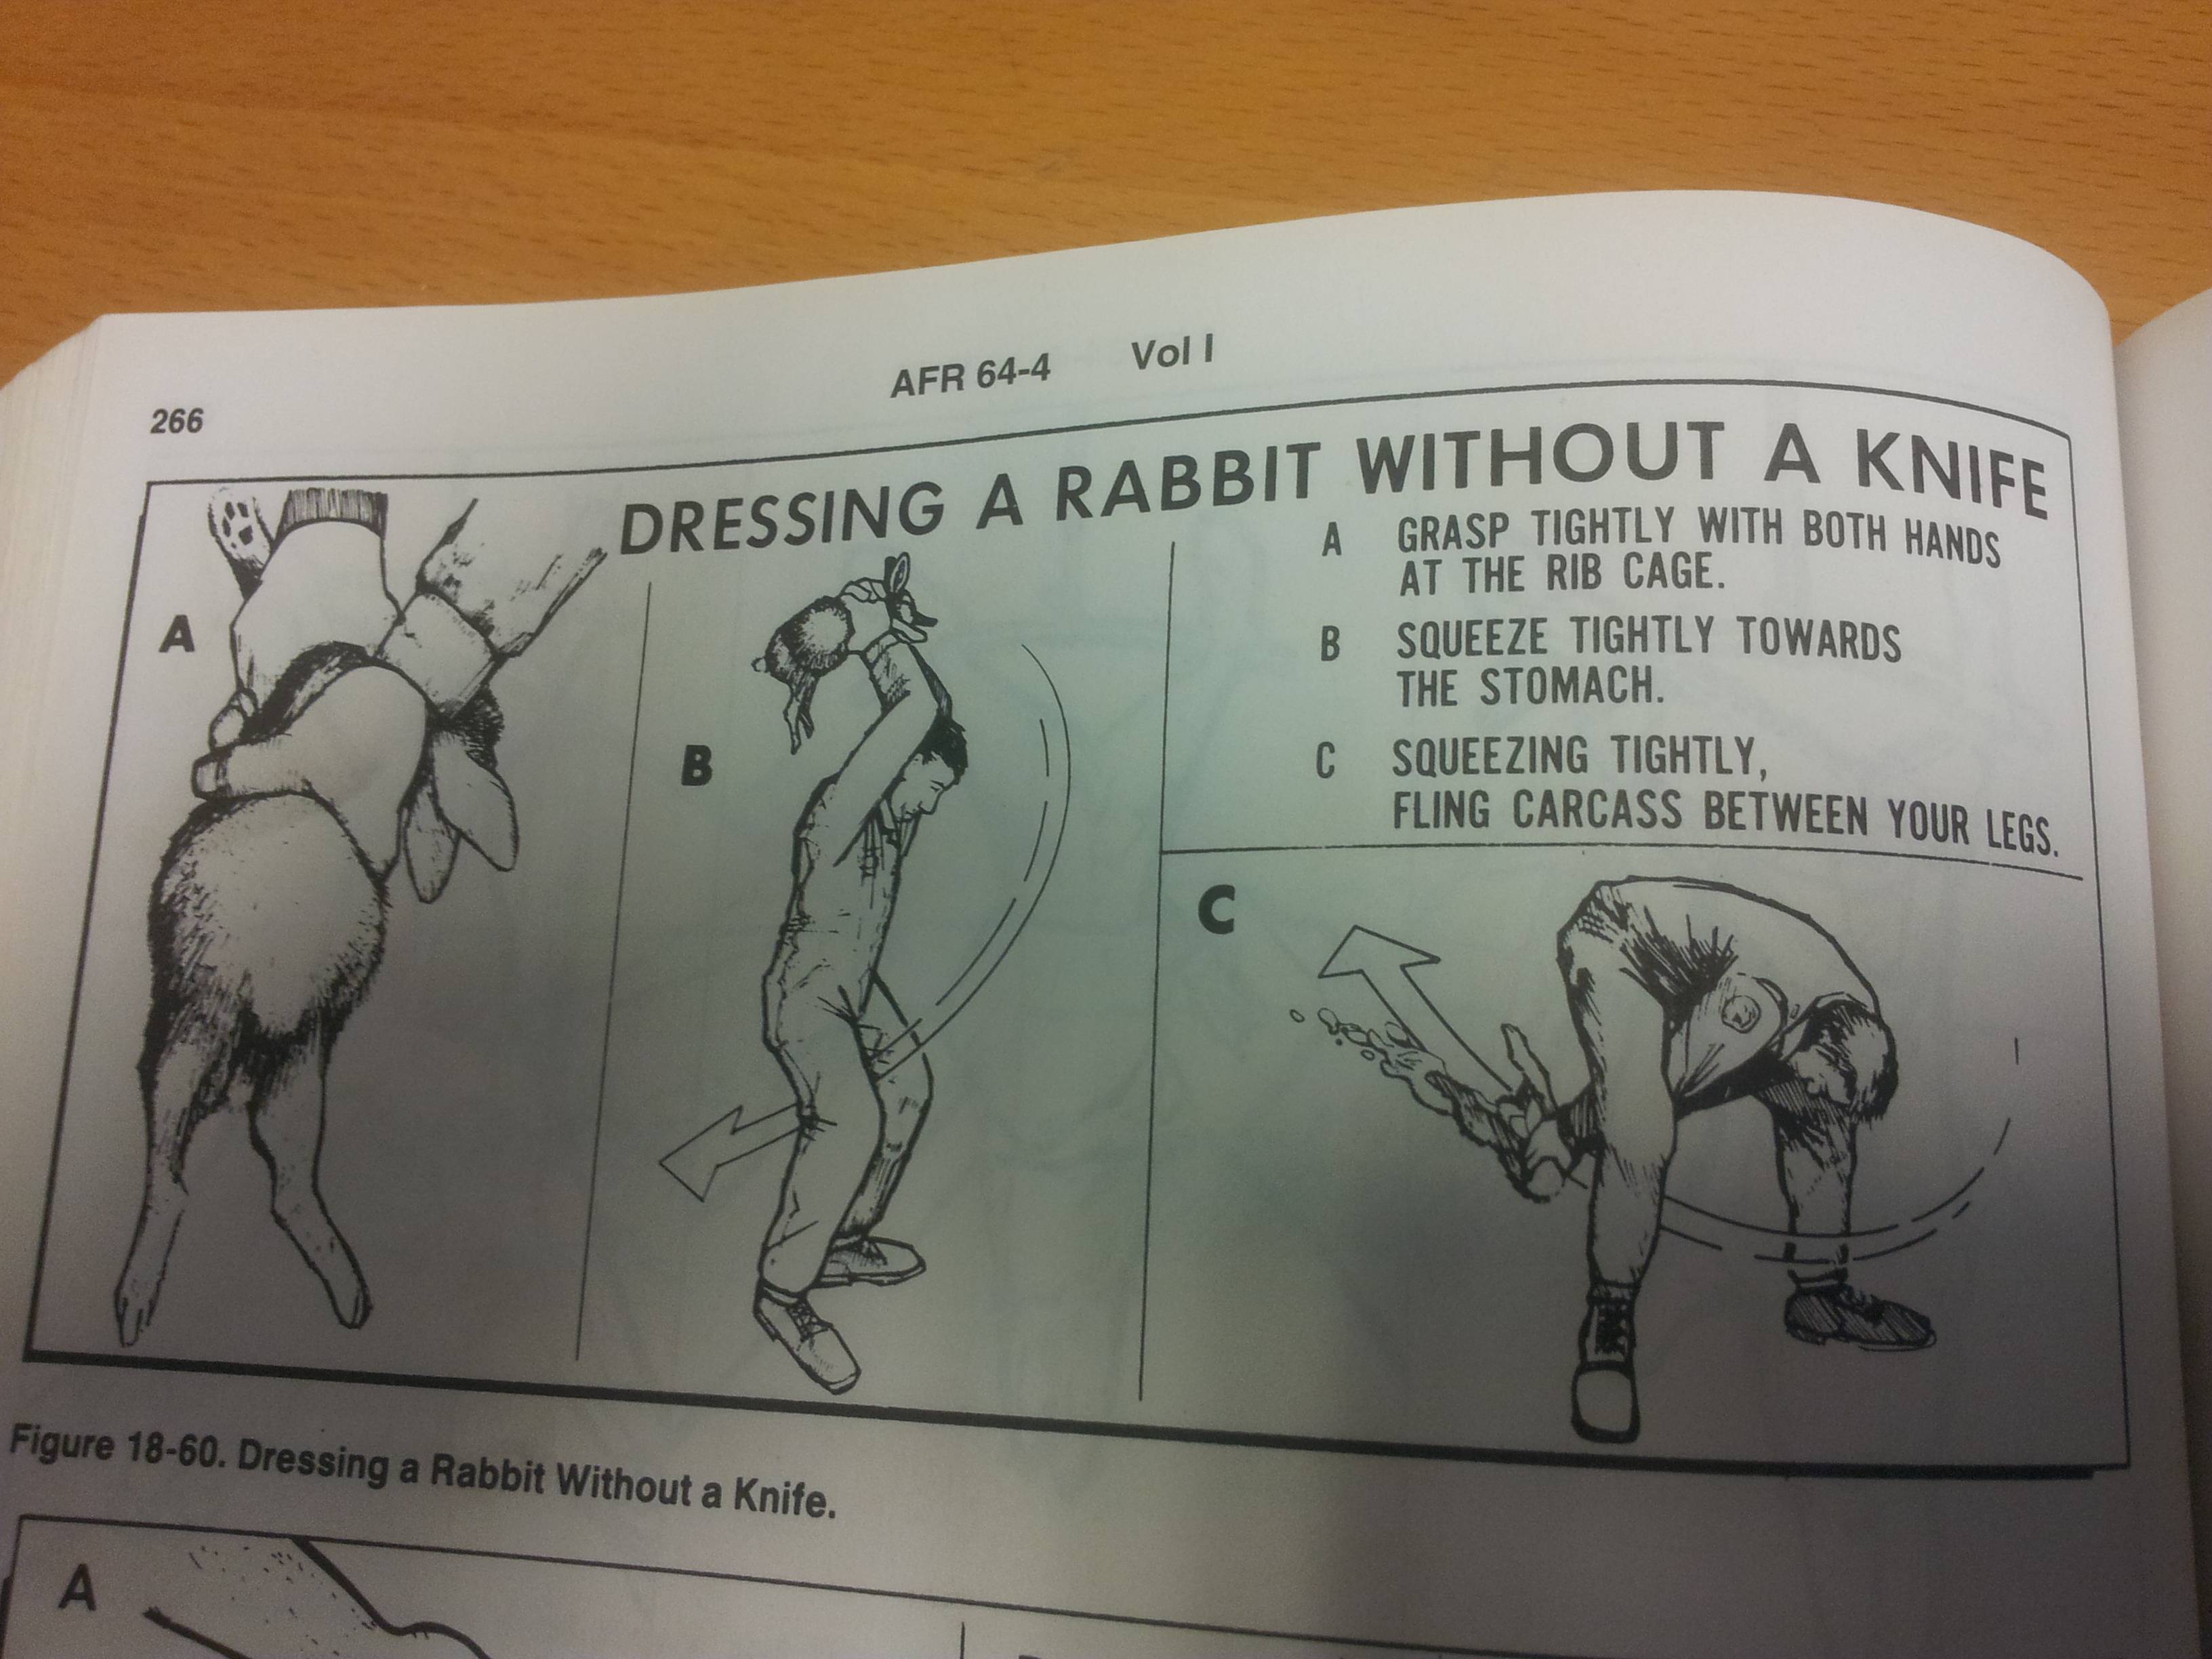 wtf field dress a rabbit - Afr 644 Voll 266 Ut A Knife Dressing A Rabbit Without A K A B Grasp Tightly With Both Hands At The Rib Cage. Squeeze Tightly Towards The Stomach. Squeezing Tightly, Fling Carcass Between Your Less C Figure 1860. Dressing a Rabbi